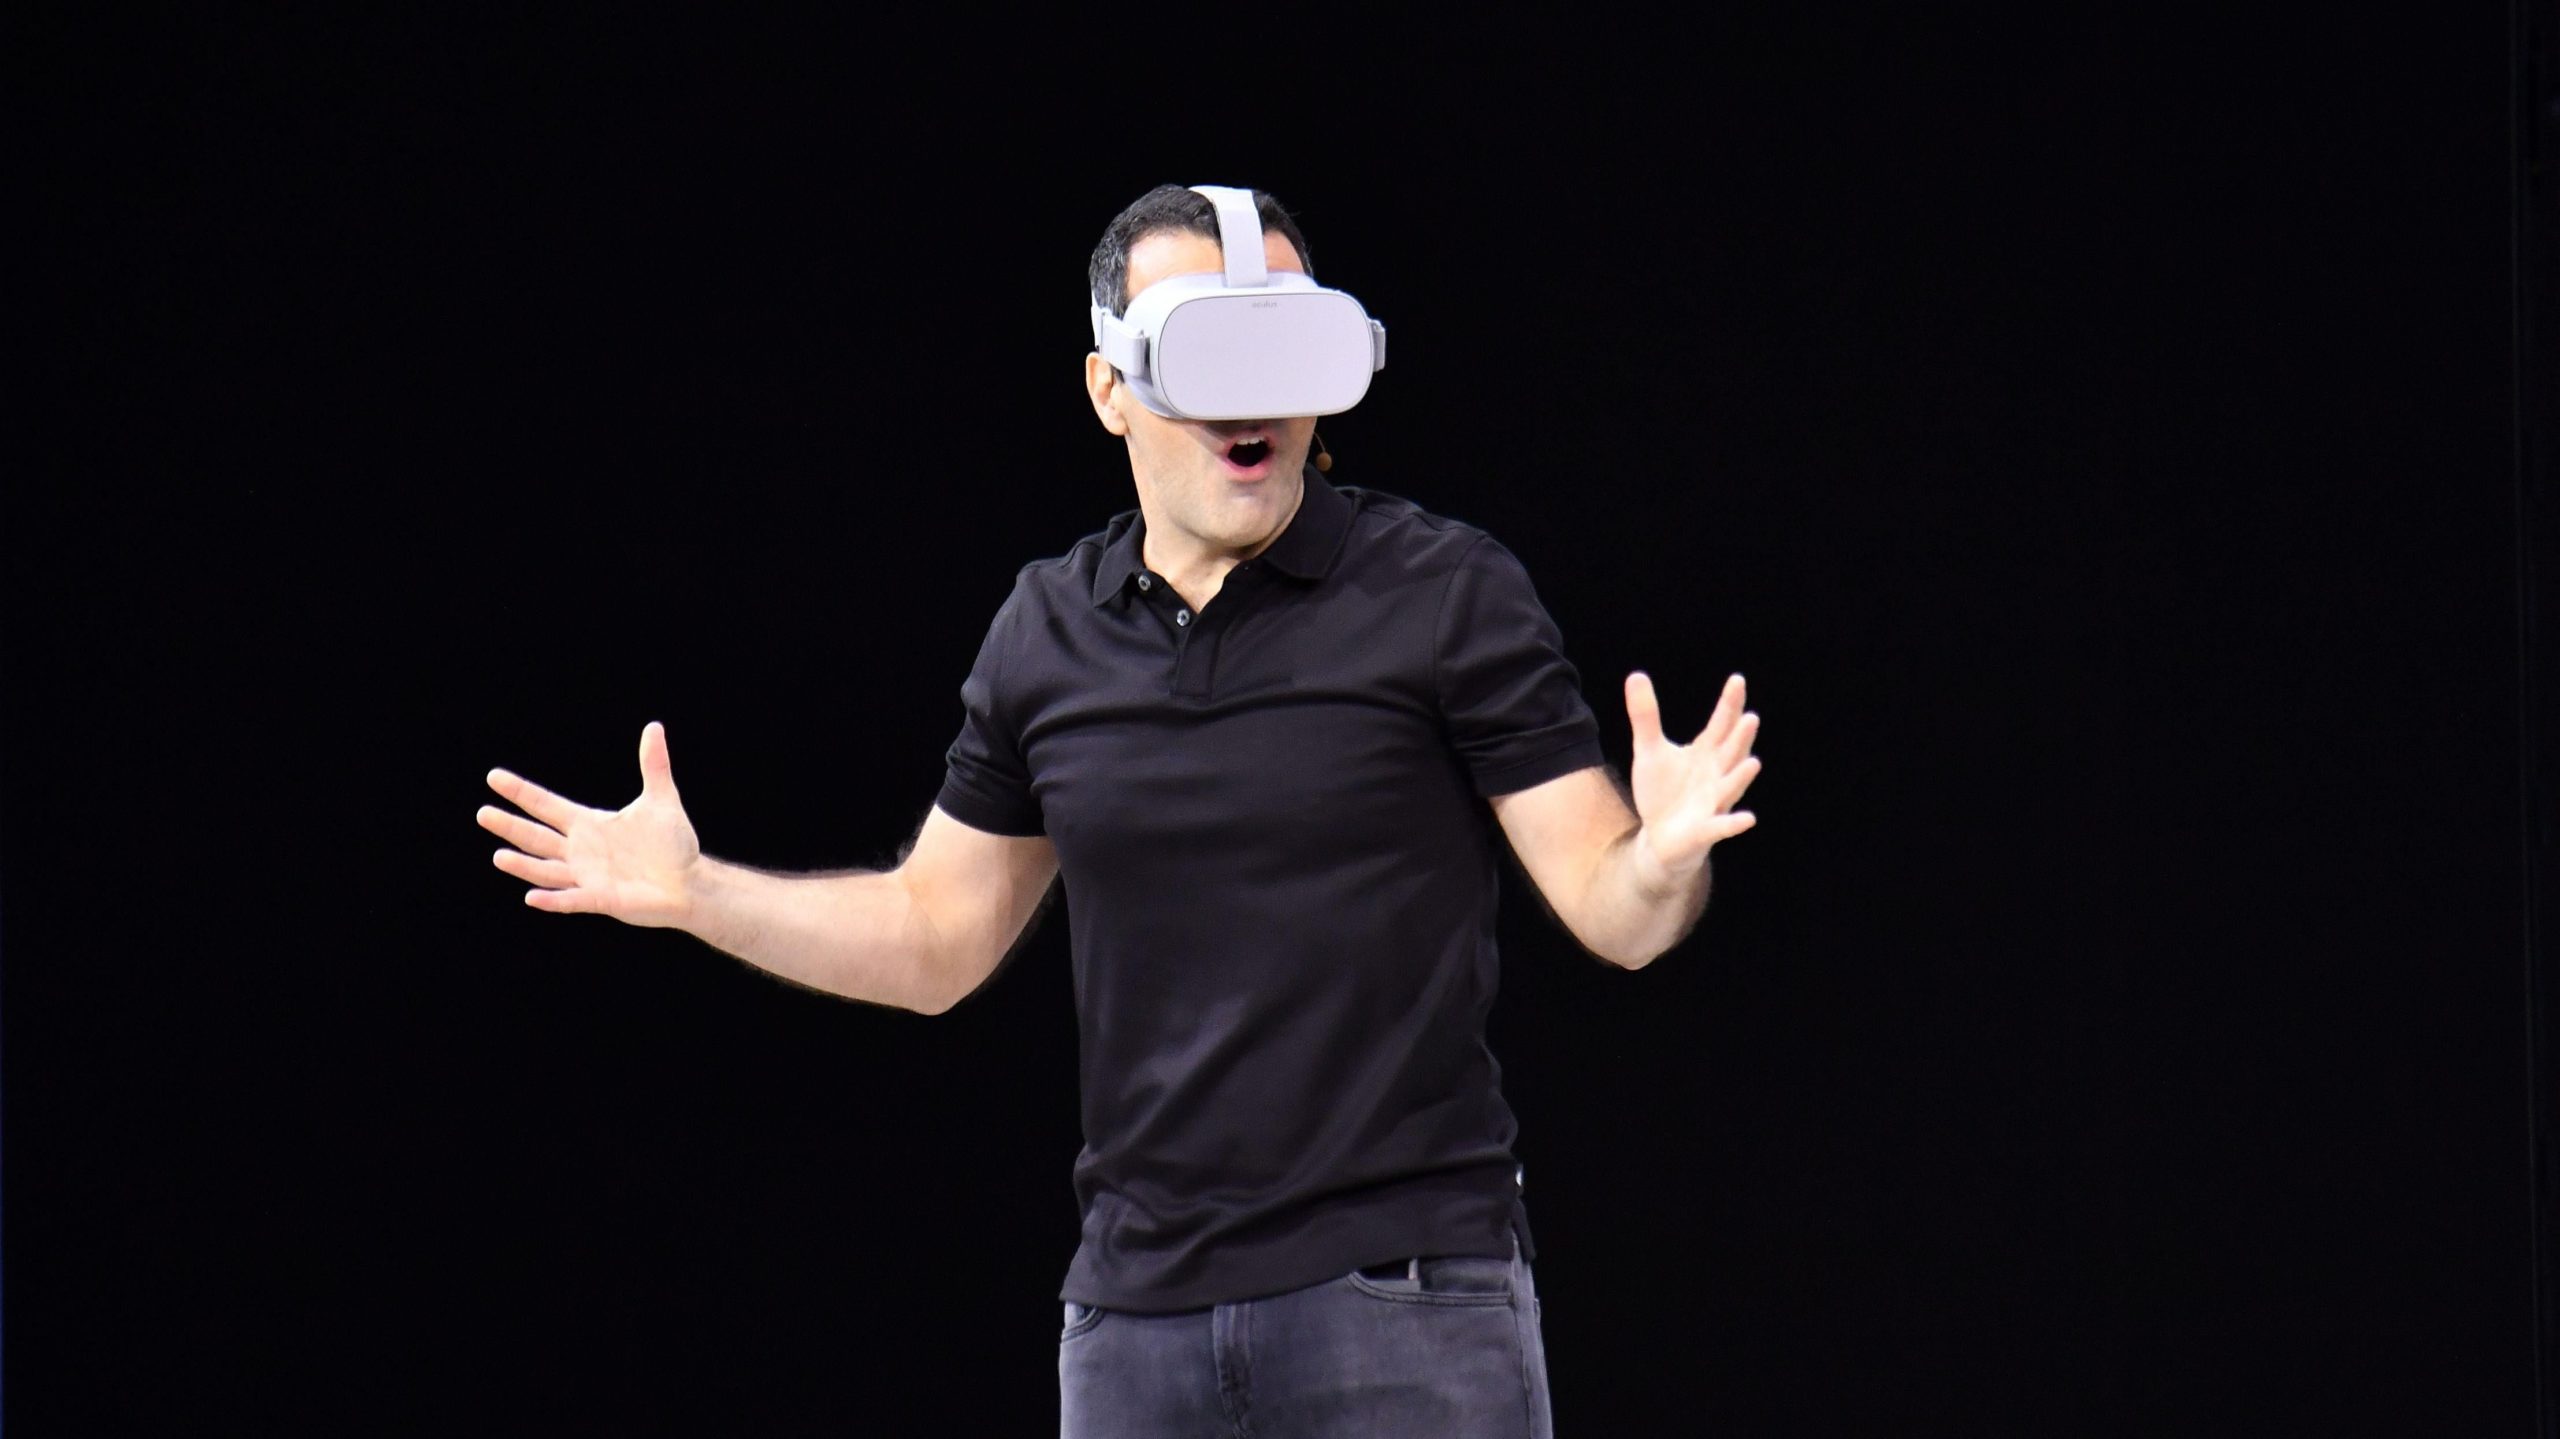  Facebook vice president of VR Hugo Barra can't contain his excitement about VR.  (Photo: Josh Edelson, Getty Images)